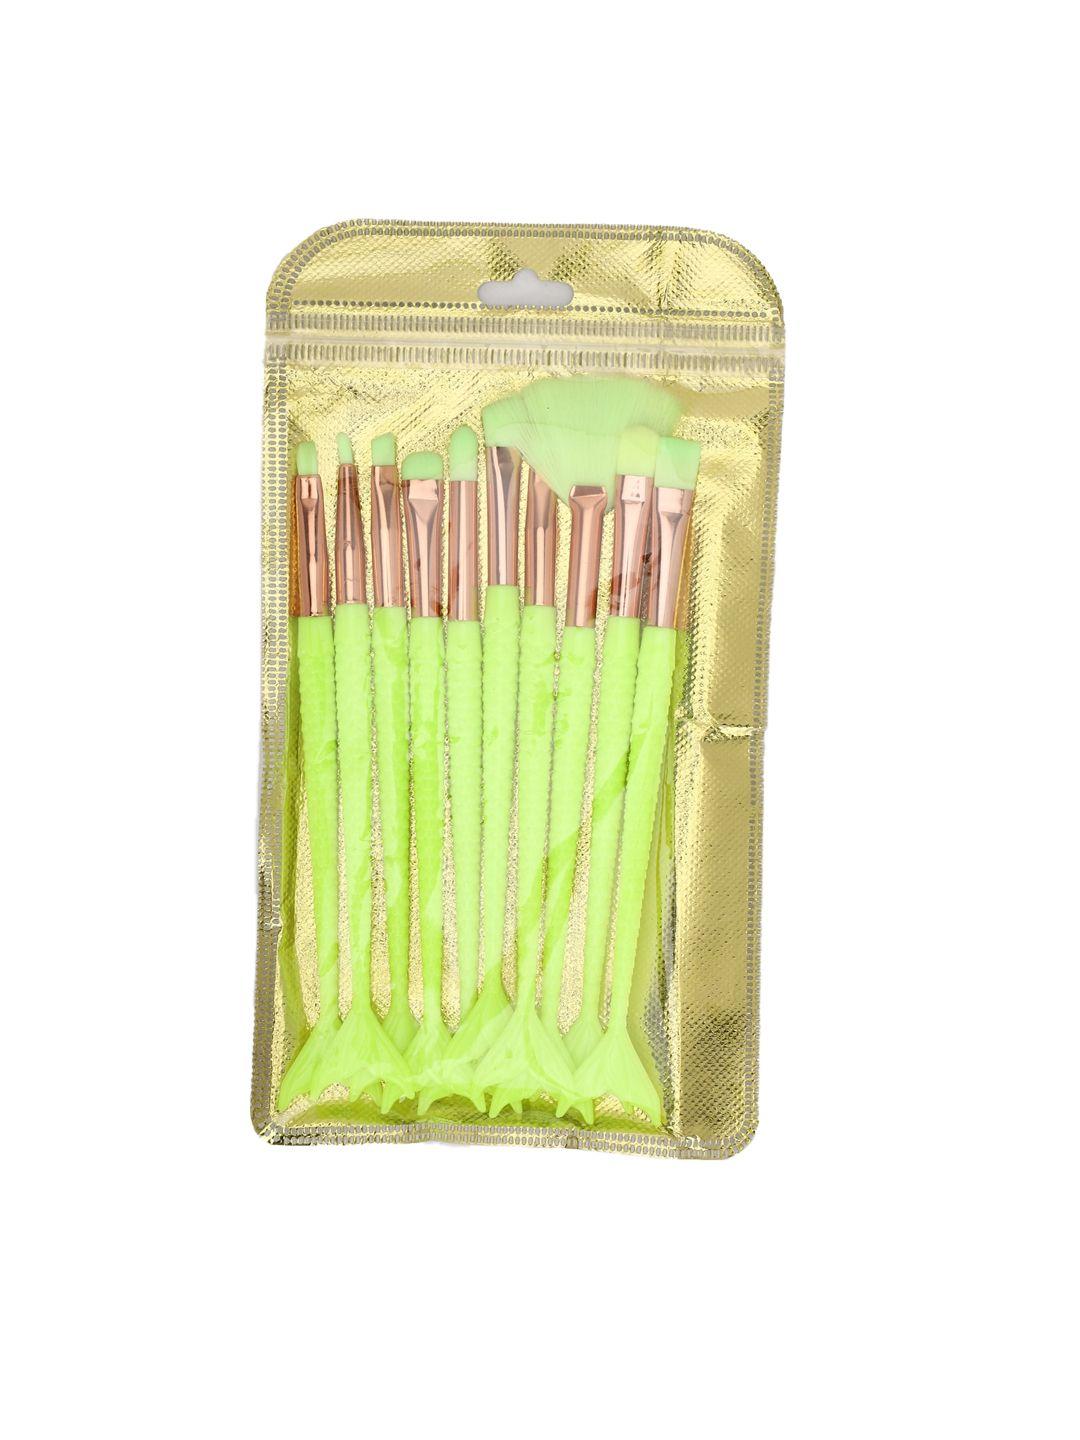 forever-21-set-of-10-green-solid-cosmetic-face-brushes